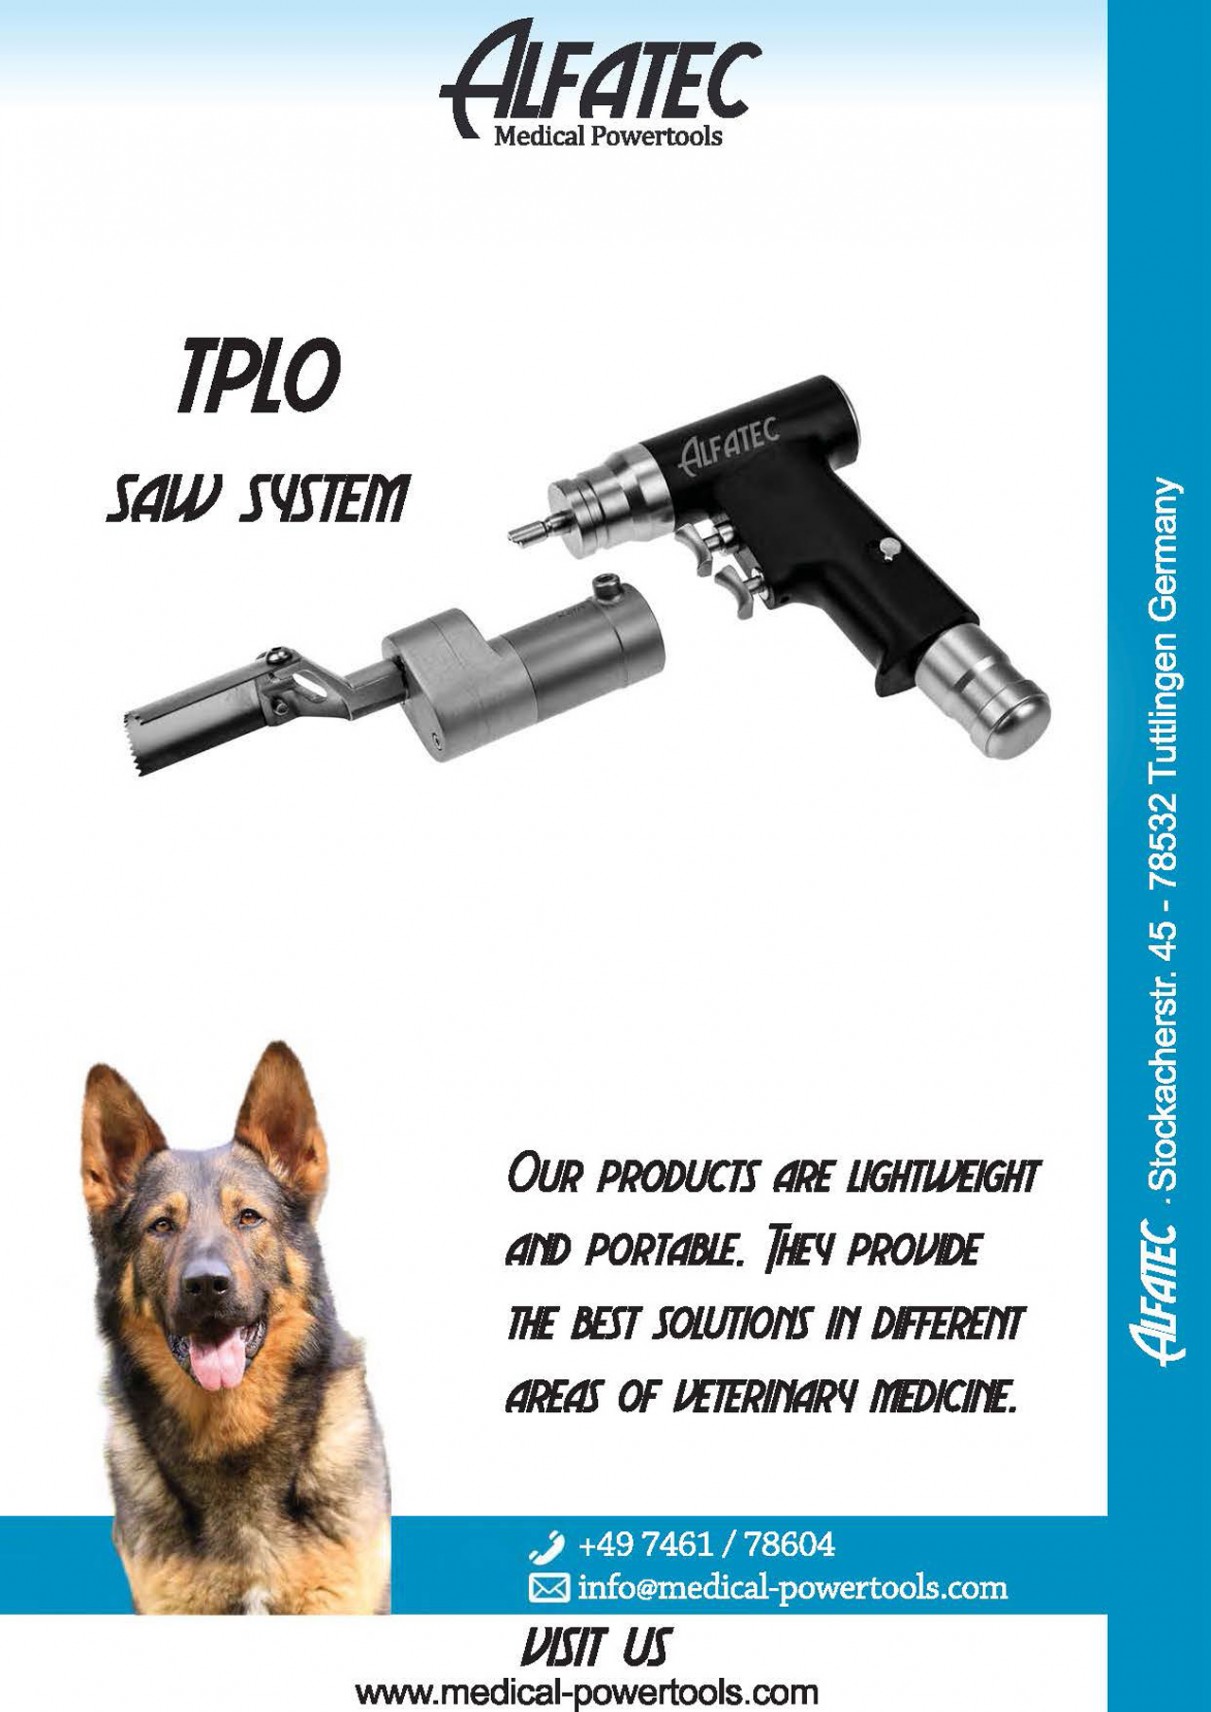 TPLO saw for veterinary medical technology alfatec